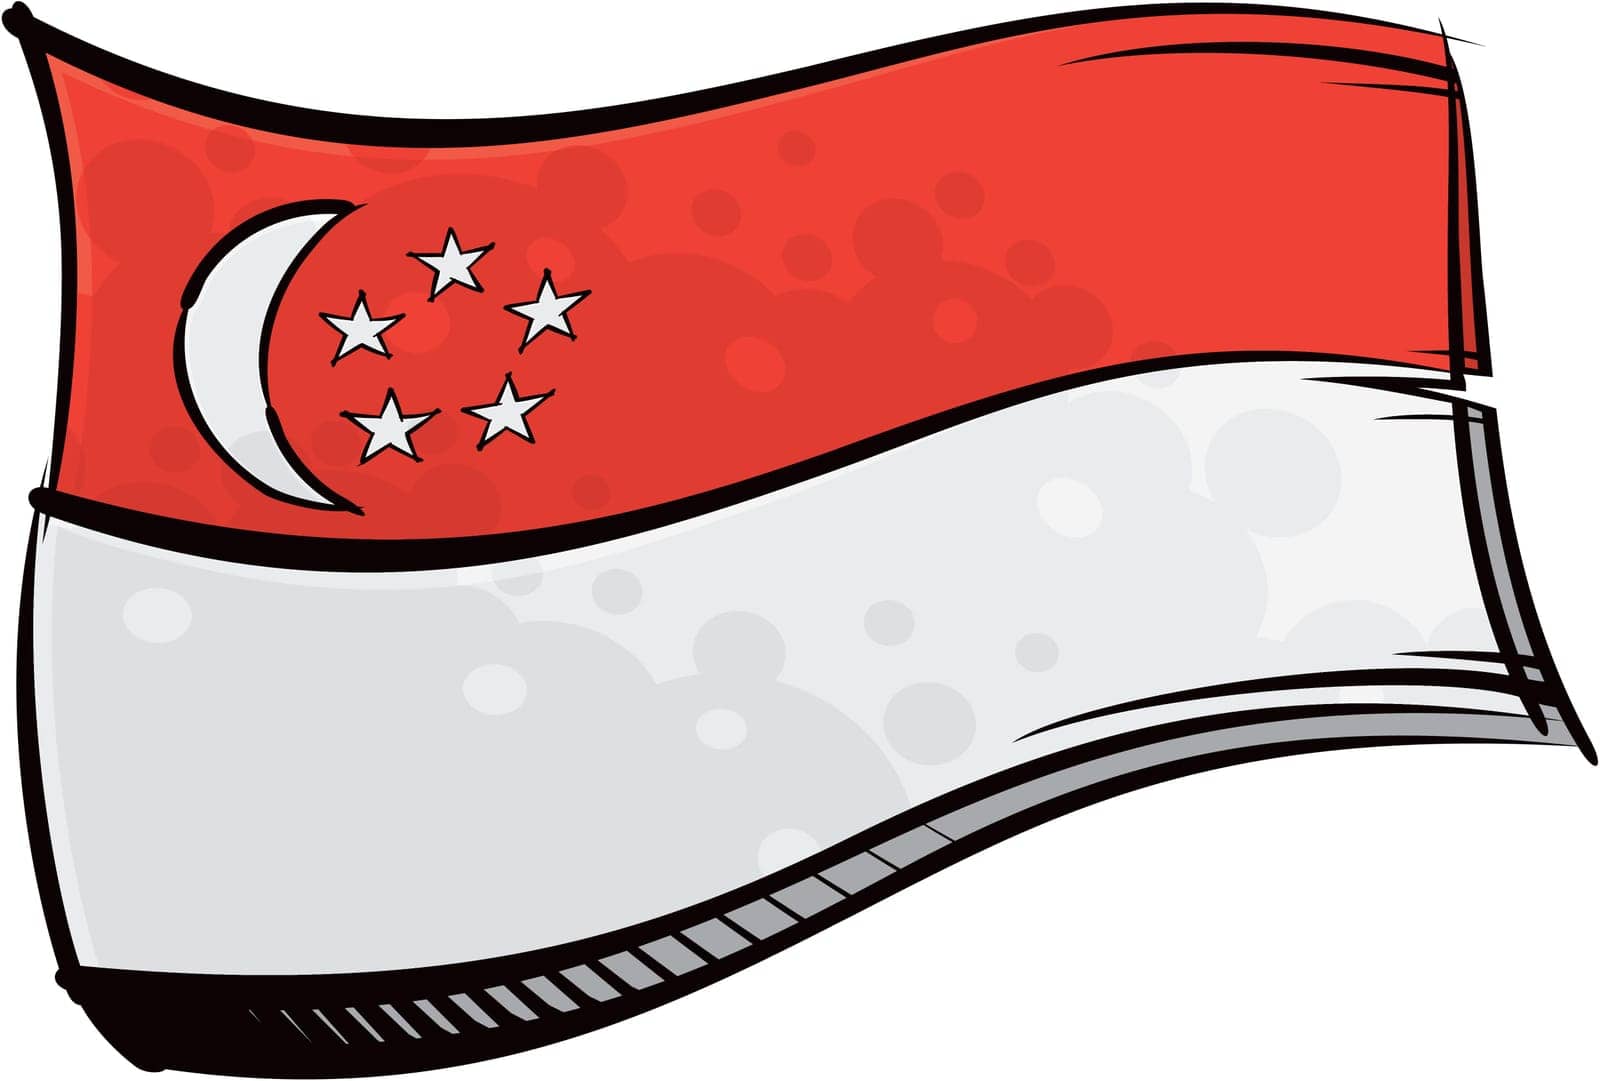 Singapore national flag created in graffiti paint style